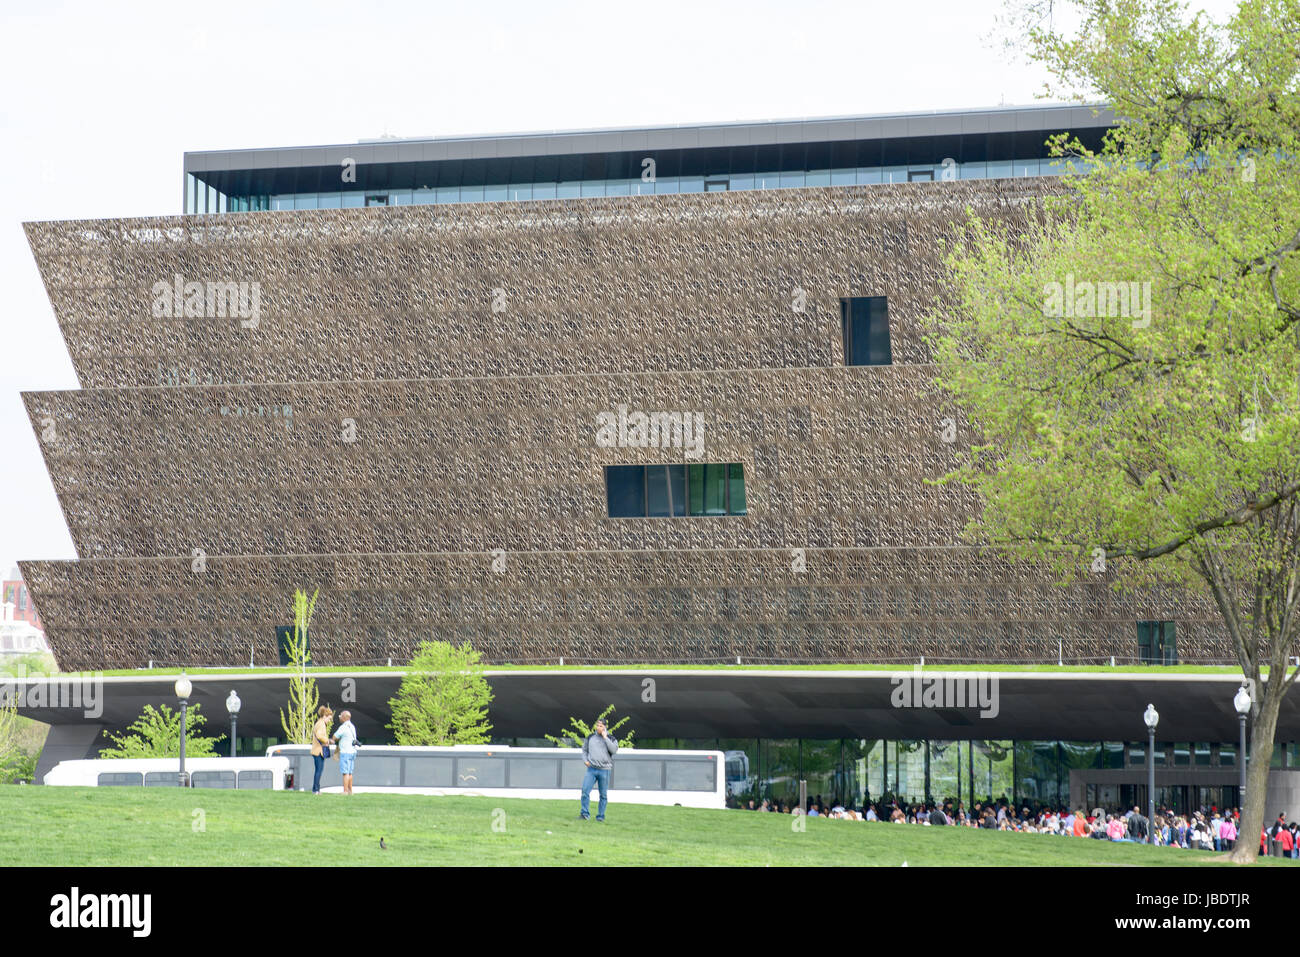 WASHINGTON, DISTRICT OF COLUMBIA - APRIL 14: Smithsonian National Museum of African American History on April 14, 2017 Stock Photo